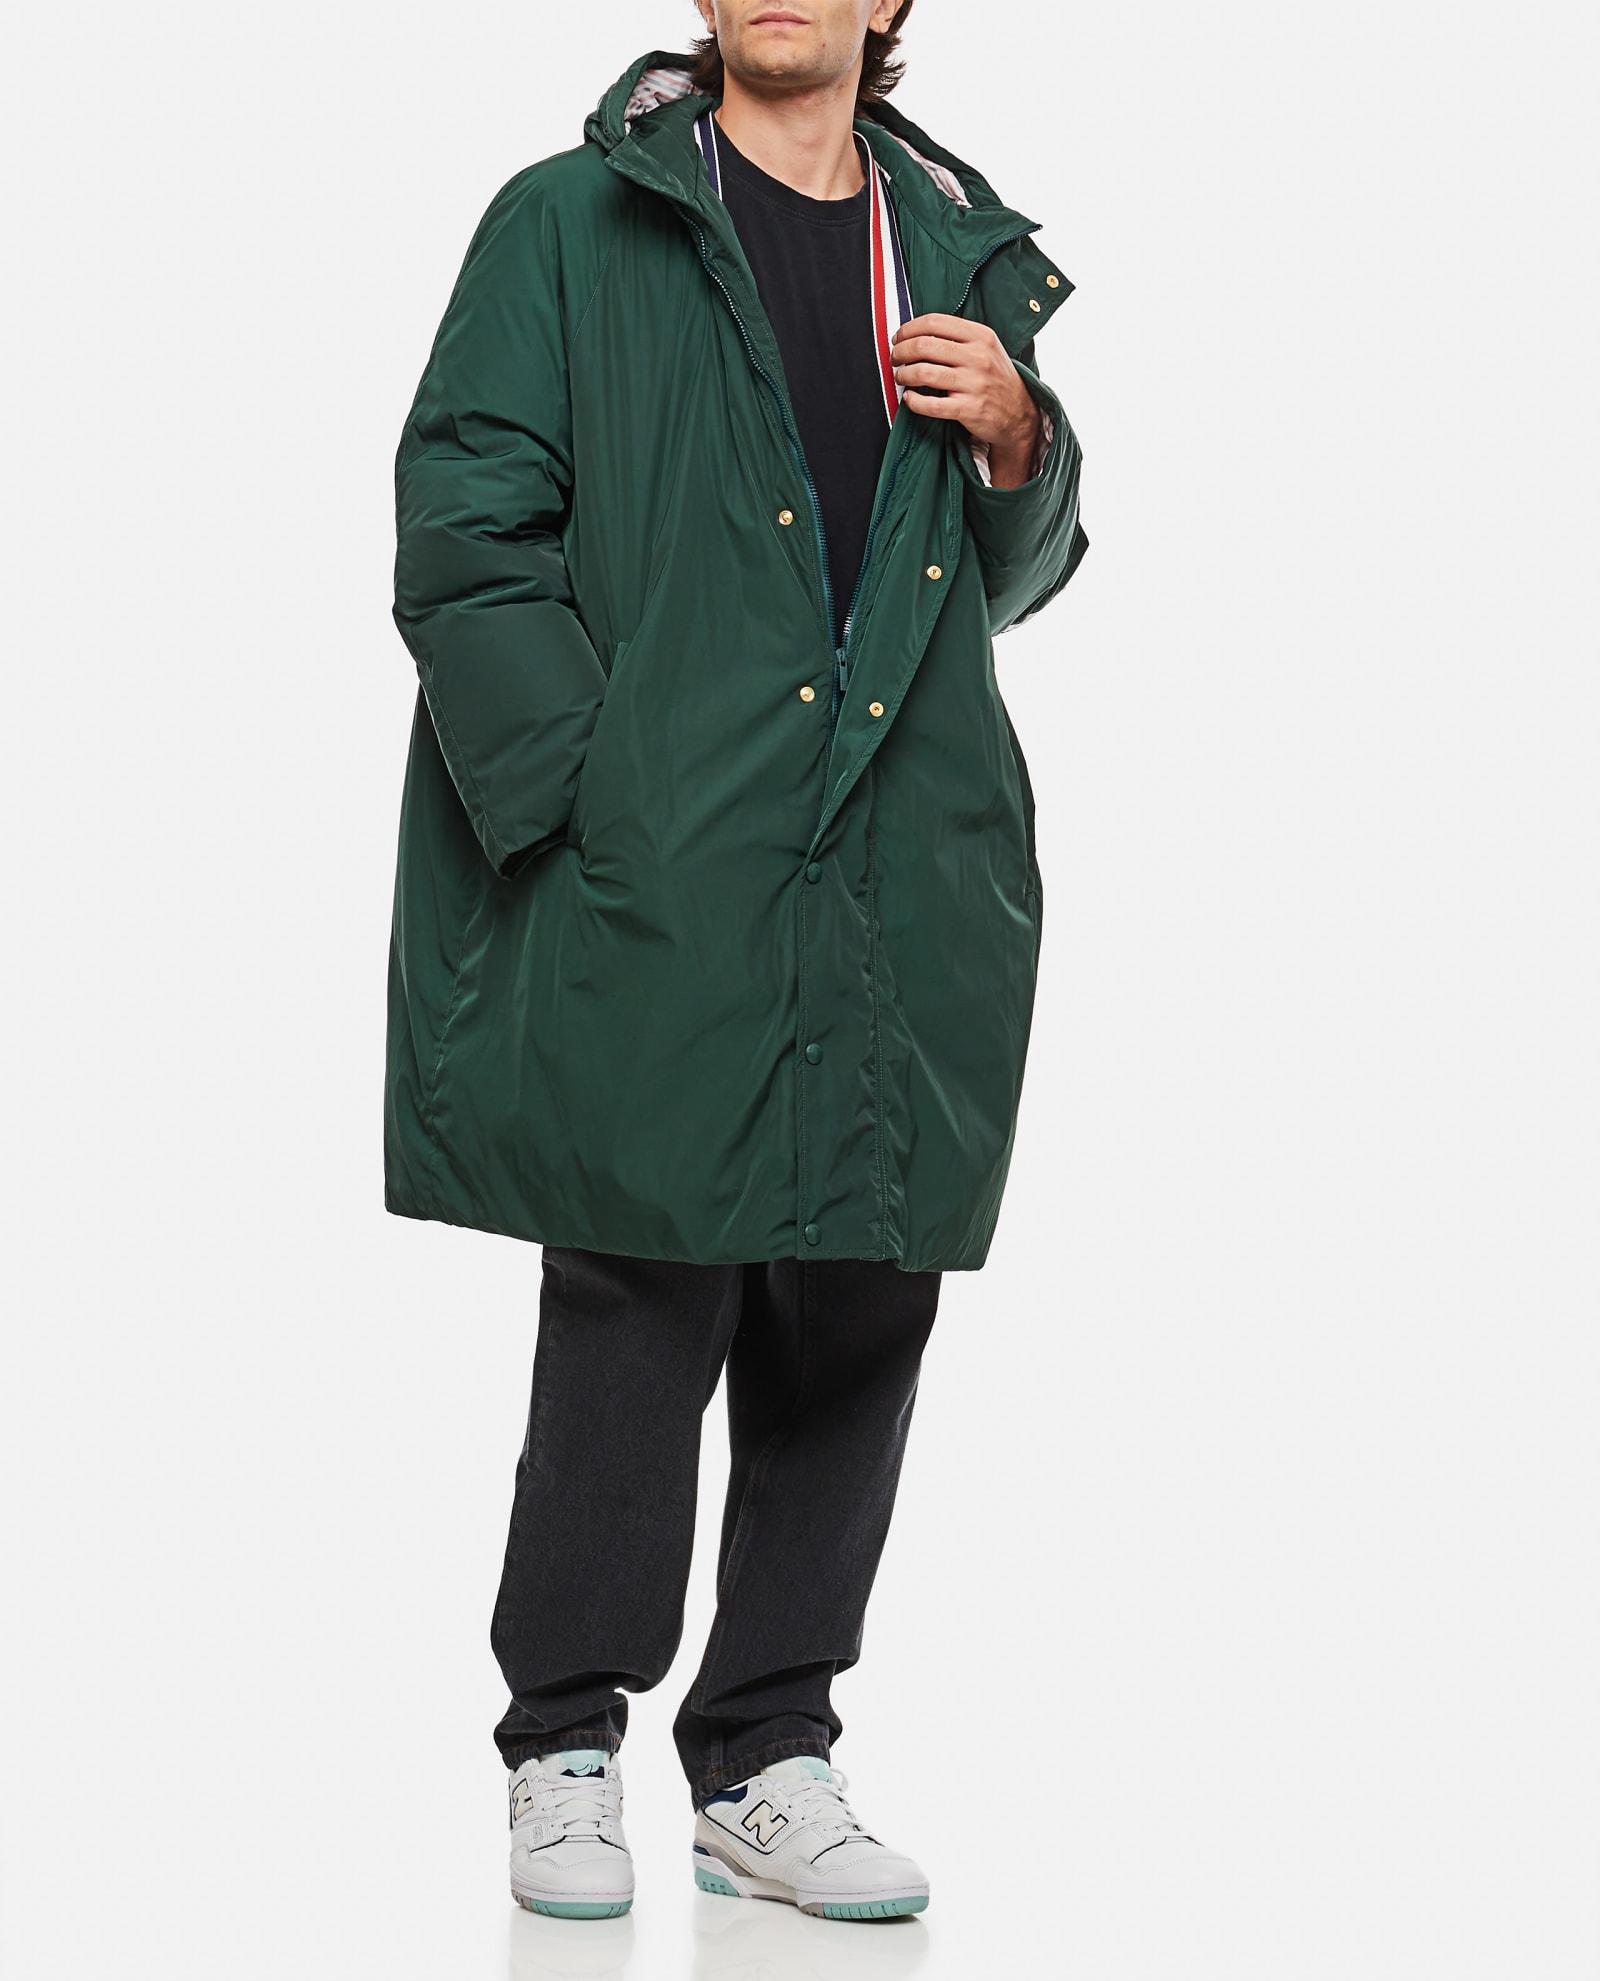 Thom Browne 4 Bar Football Sideline Parka In Poly Twill in Green